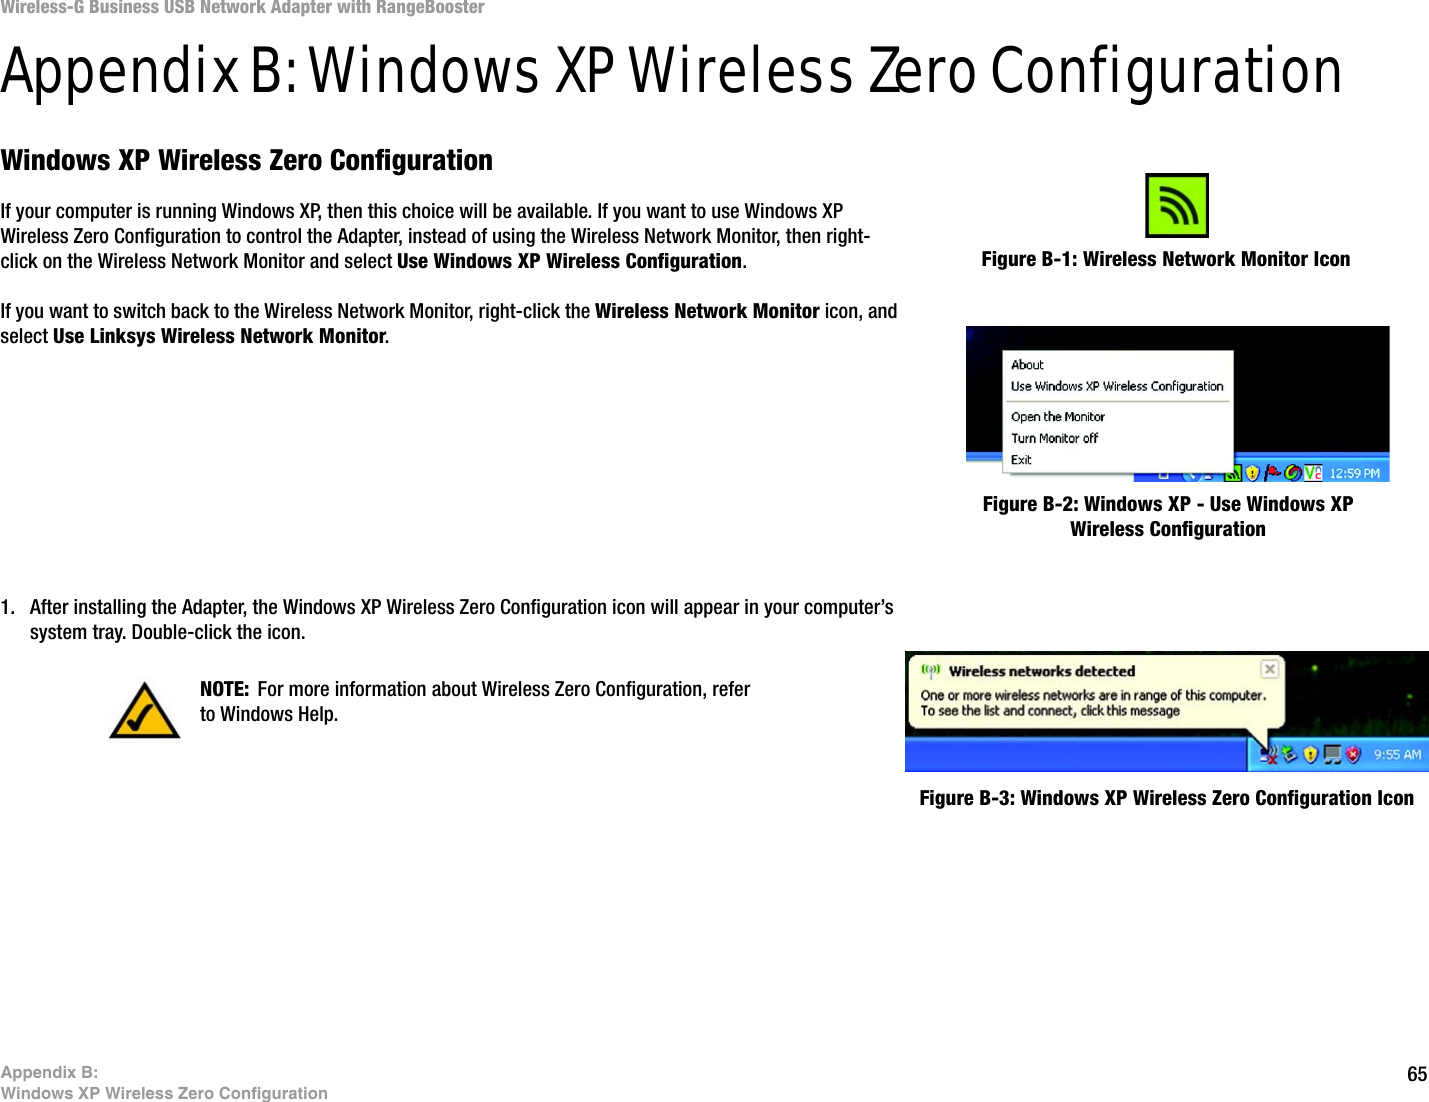 65Appendix B: Windows XP Wireless Zero ConfigurationWireless-G Business USB Network Adapter with RangeBoosterAppendix B: Windows XP Wireless Zero ConfigurationWindows XP Wireless Zero ConfigurationIf your computer is running Windows XP, then this choice will be available. If you want to use Windows XP Wireless Zero Configuration to control the Adapter, instead of using the Wireless Network Monitor, then right-click on the Wireless Network Monitor and select Use Windows XP Wireless Configuration. If you want to switch back to the Wireless Network Monitor, right-click the Wireless Network Monitor icon, and select Use Linksys Wireless Network Monitor.1. After installing the Adapter, the Windows XP Wireless Zero Configuration icon will appear in your computer’s system tray. Double-click the icon. Figure B-1: Wireless Network Monitor IconFigure B-2: Windows XP - Use Windows XP Wireless ConfigurationNOTE: For more information about Wireless Zero Configuration, refer to Windows Help.Figure B-3: Windows XP Wireless Zero Configuration Icon